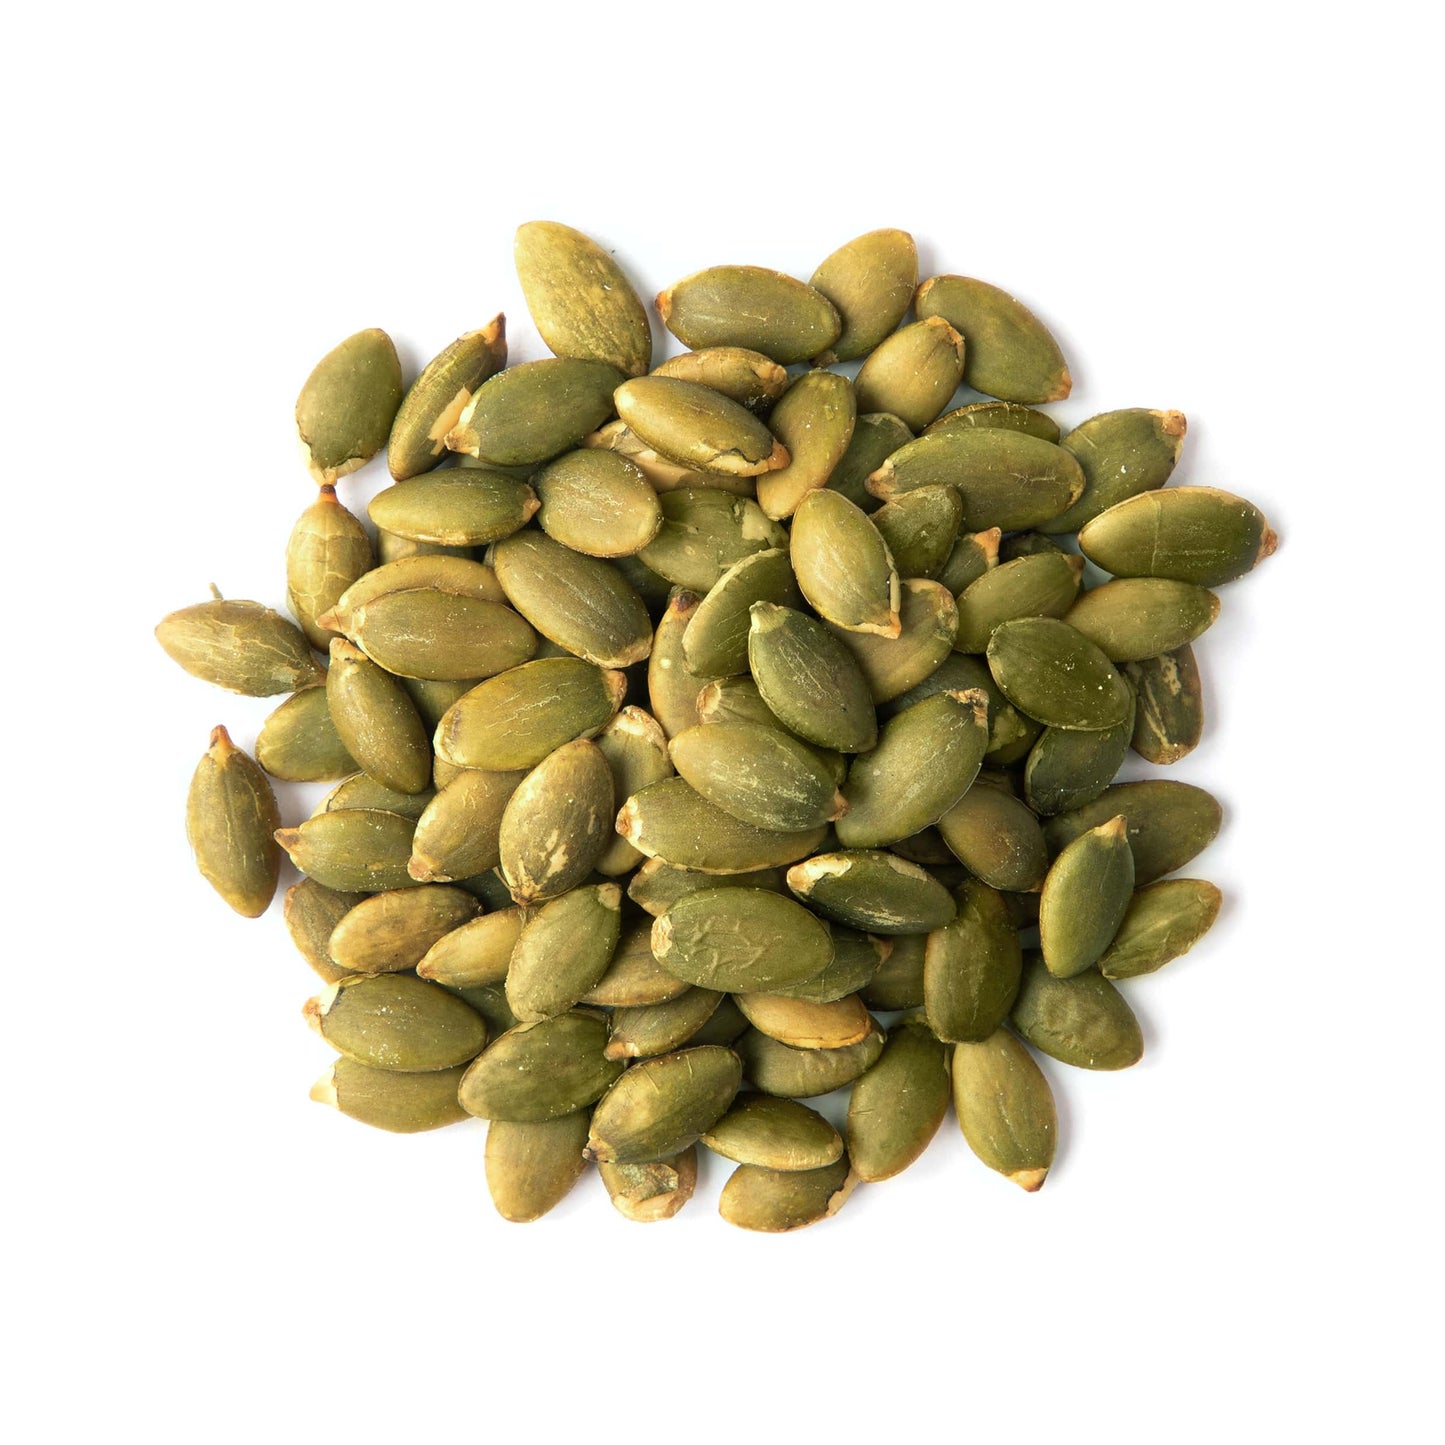 Dry Roasted Pumpkin Seed Kernels - Unsalted, Oven Roasted Whole Pepitas, No Oil Added, Shelled, Vegan, Kosher, Keto-Friendly, Bulk. Low in Carbs. High In Protein. Great for Snacking